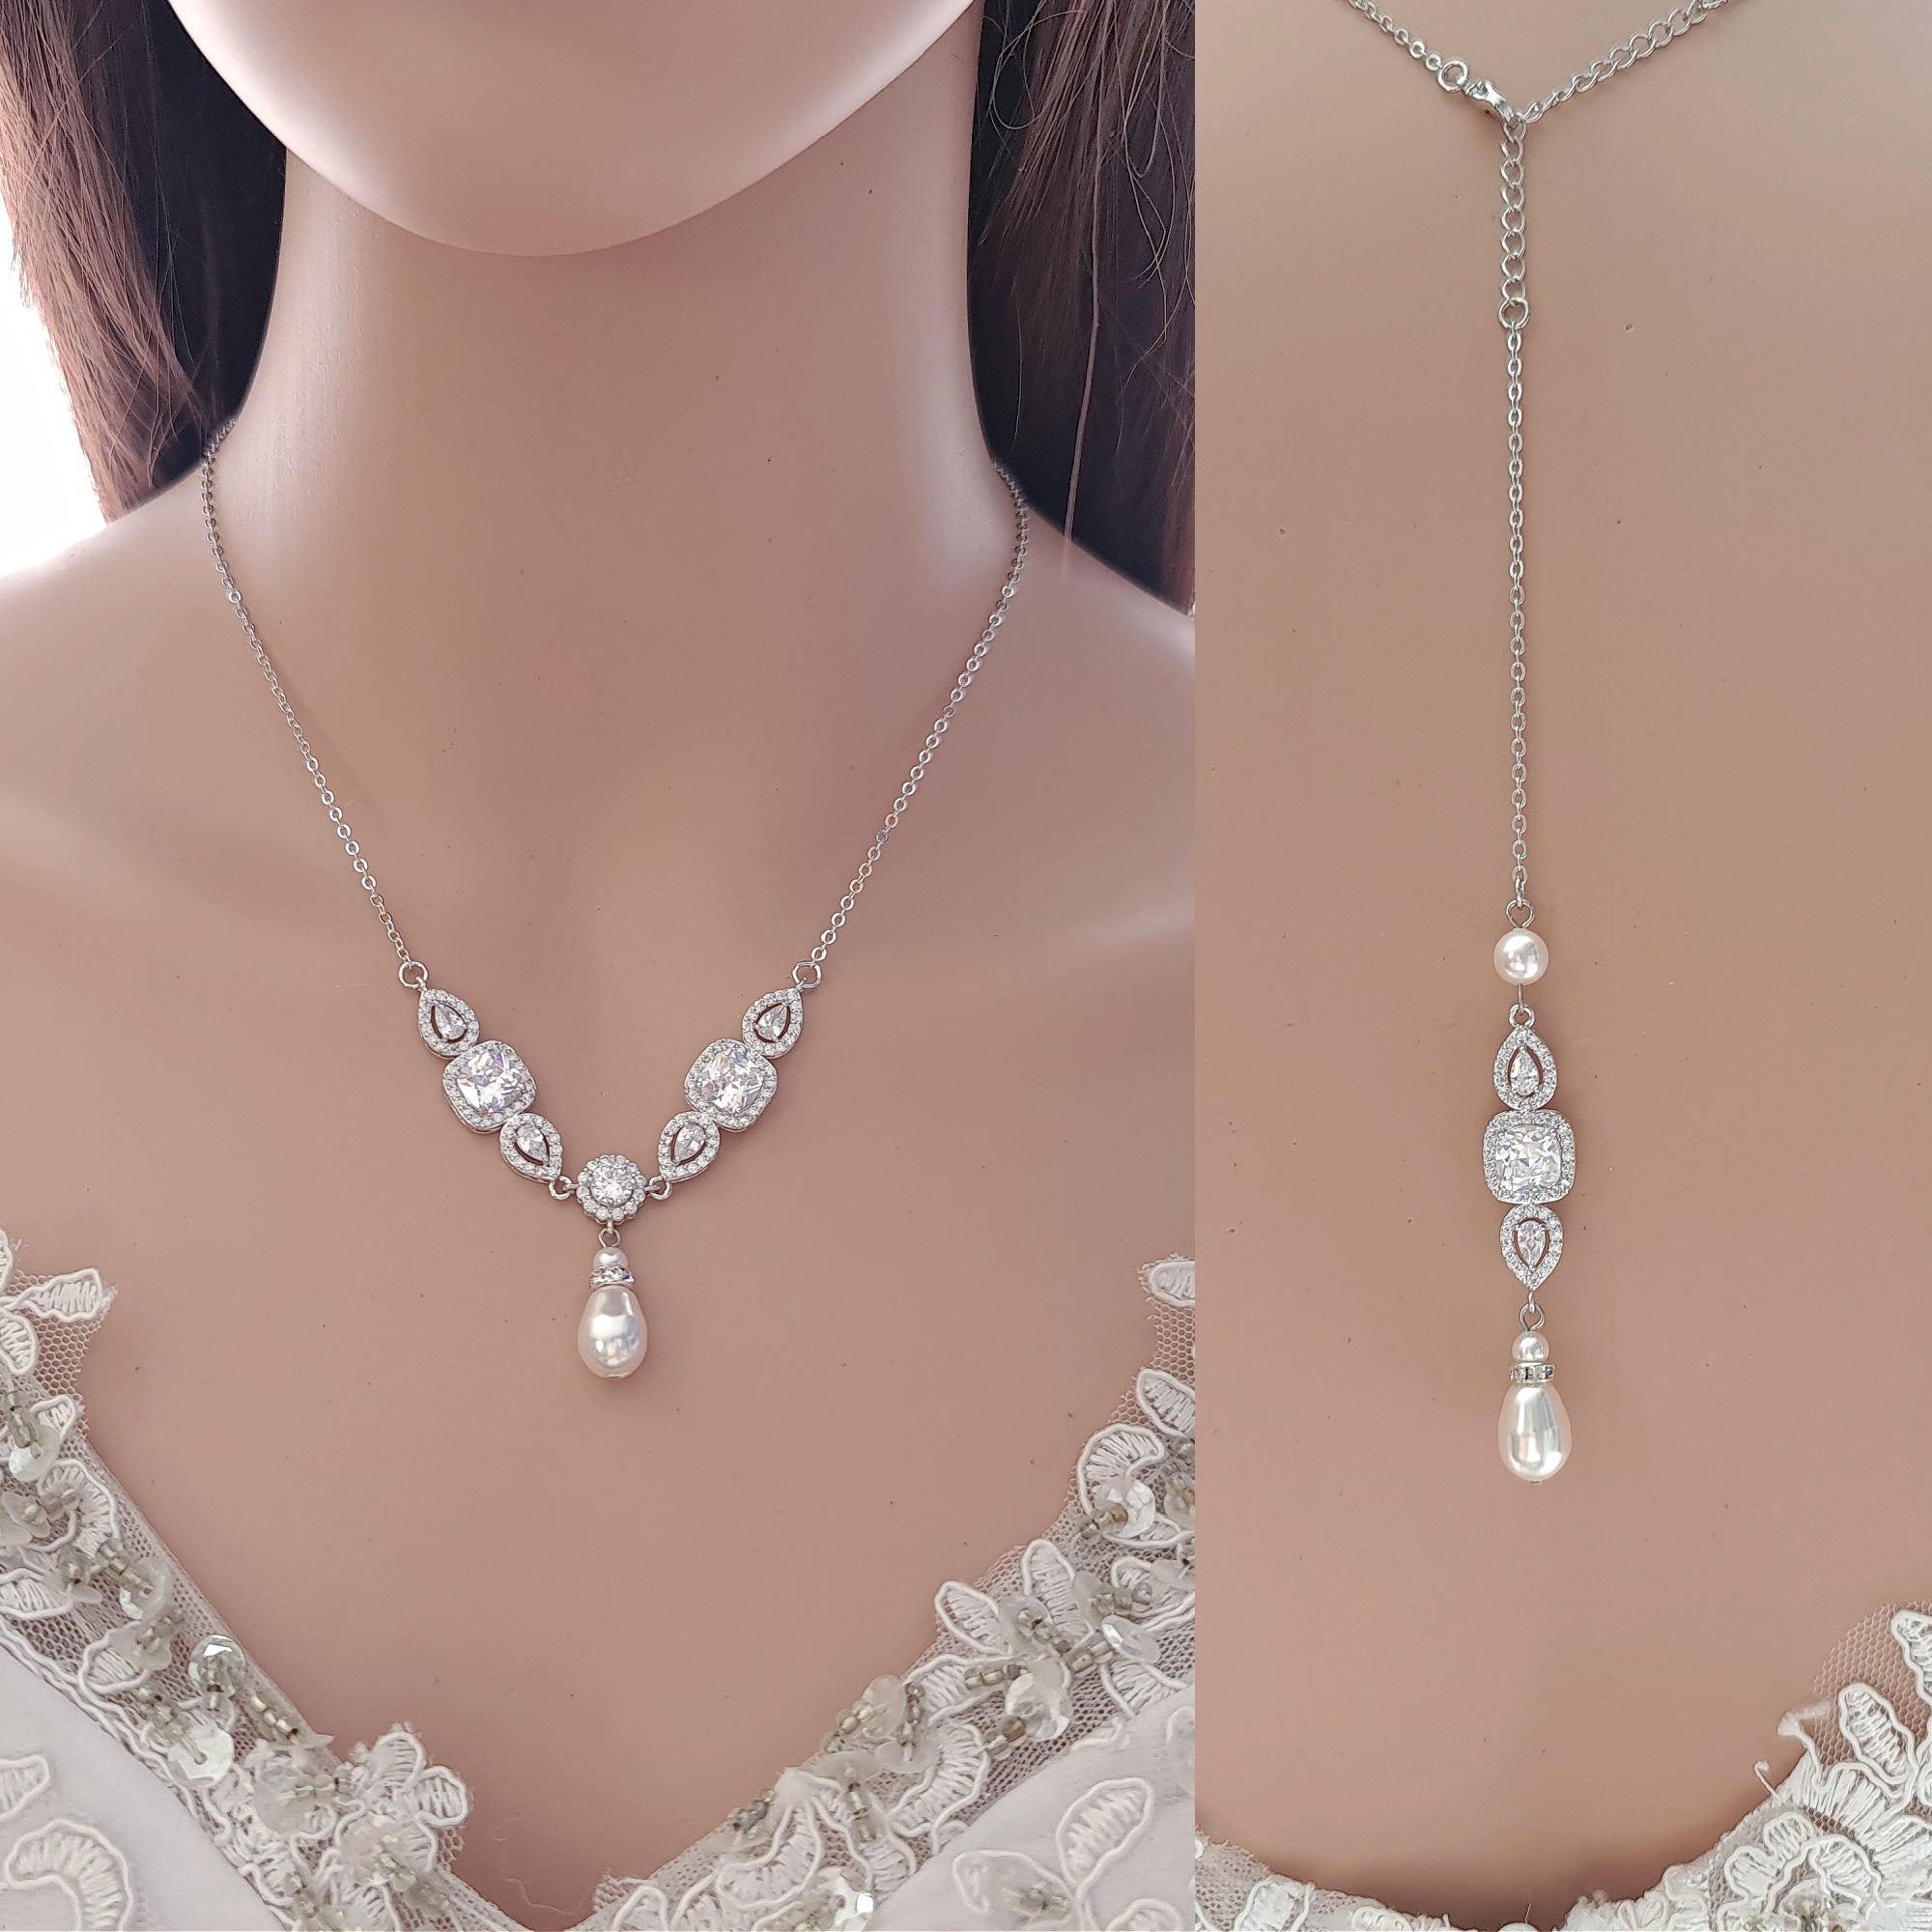 pearl backdrop necklace, pearl bridal jewelry for backless or low back dress